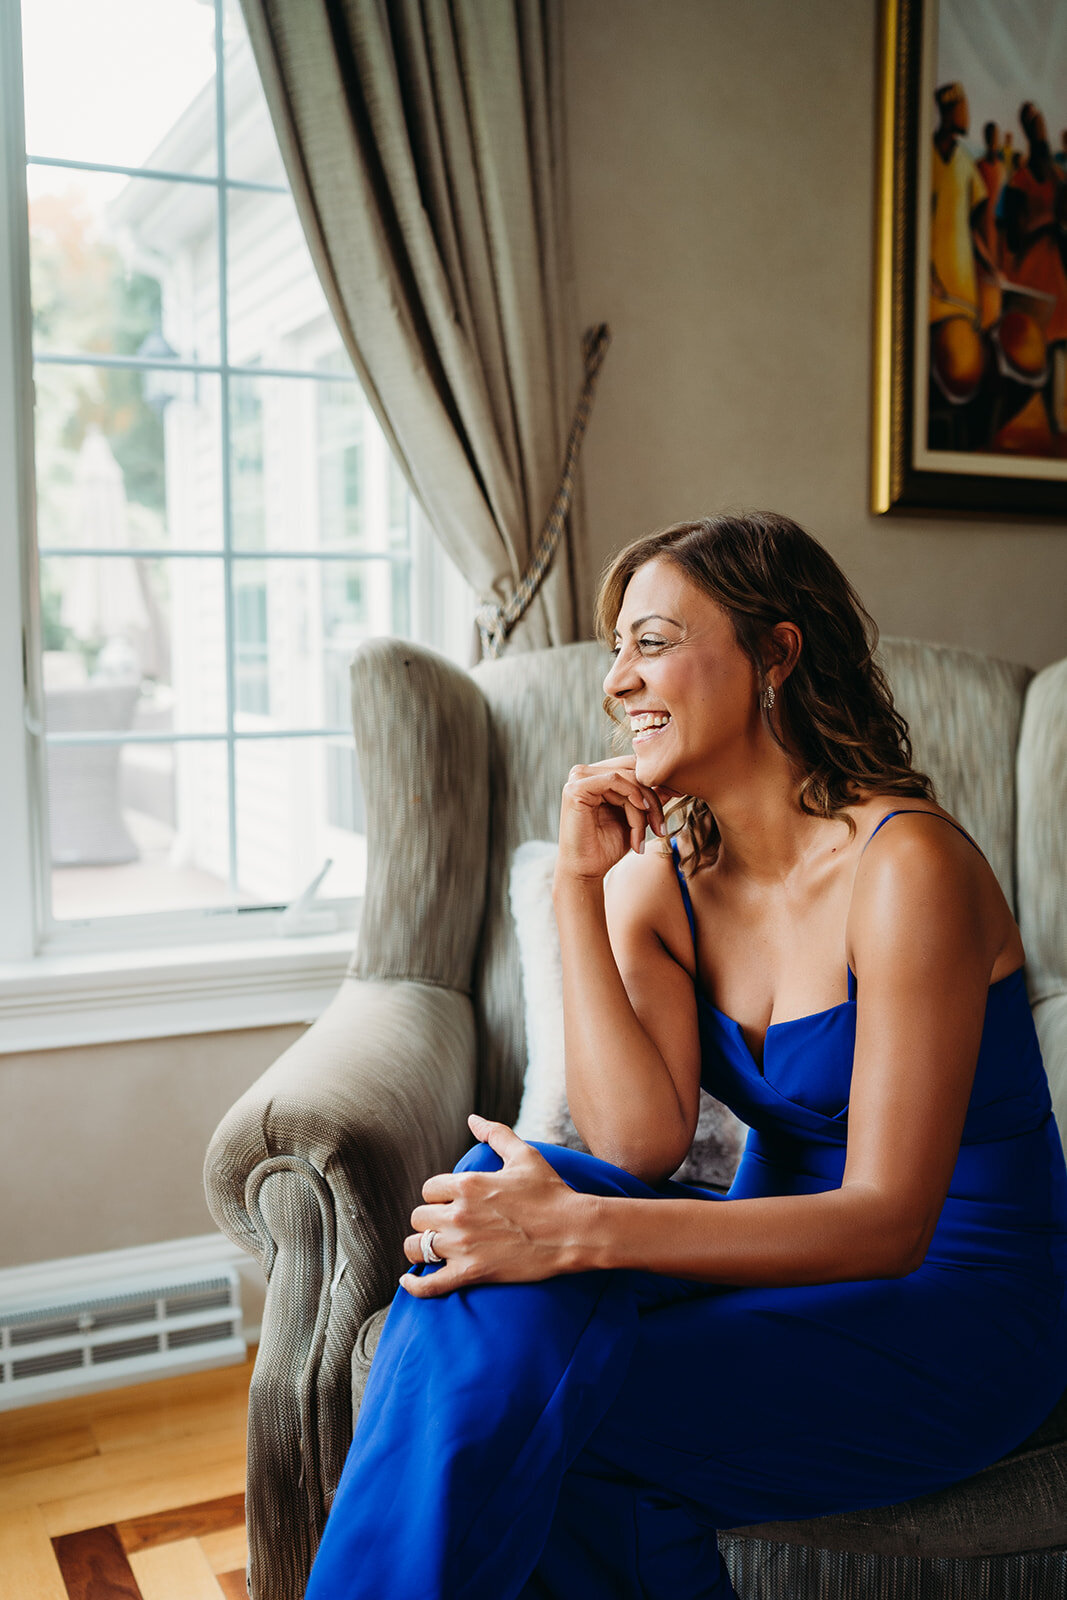 woman in blue jumpsuit looks out window and smiles